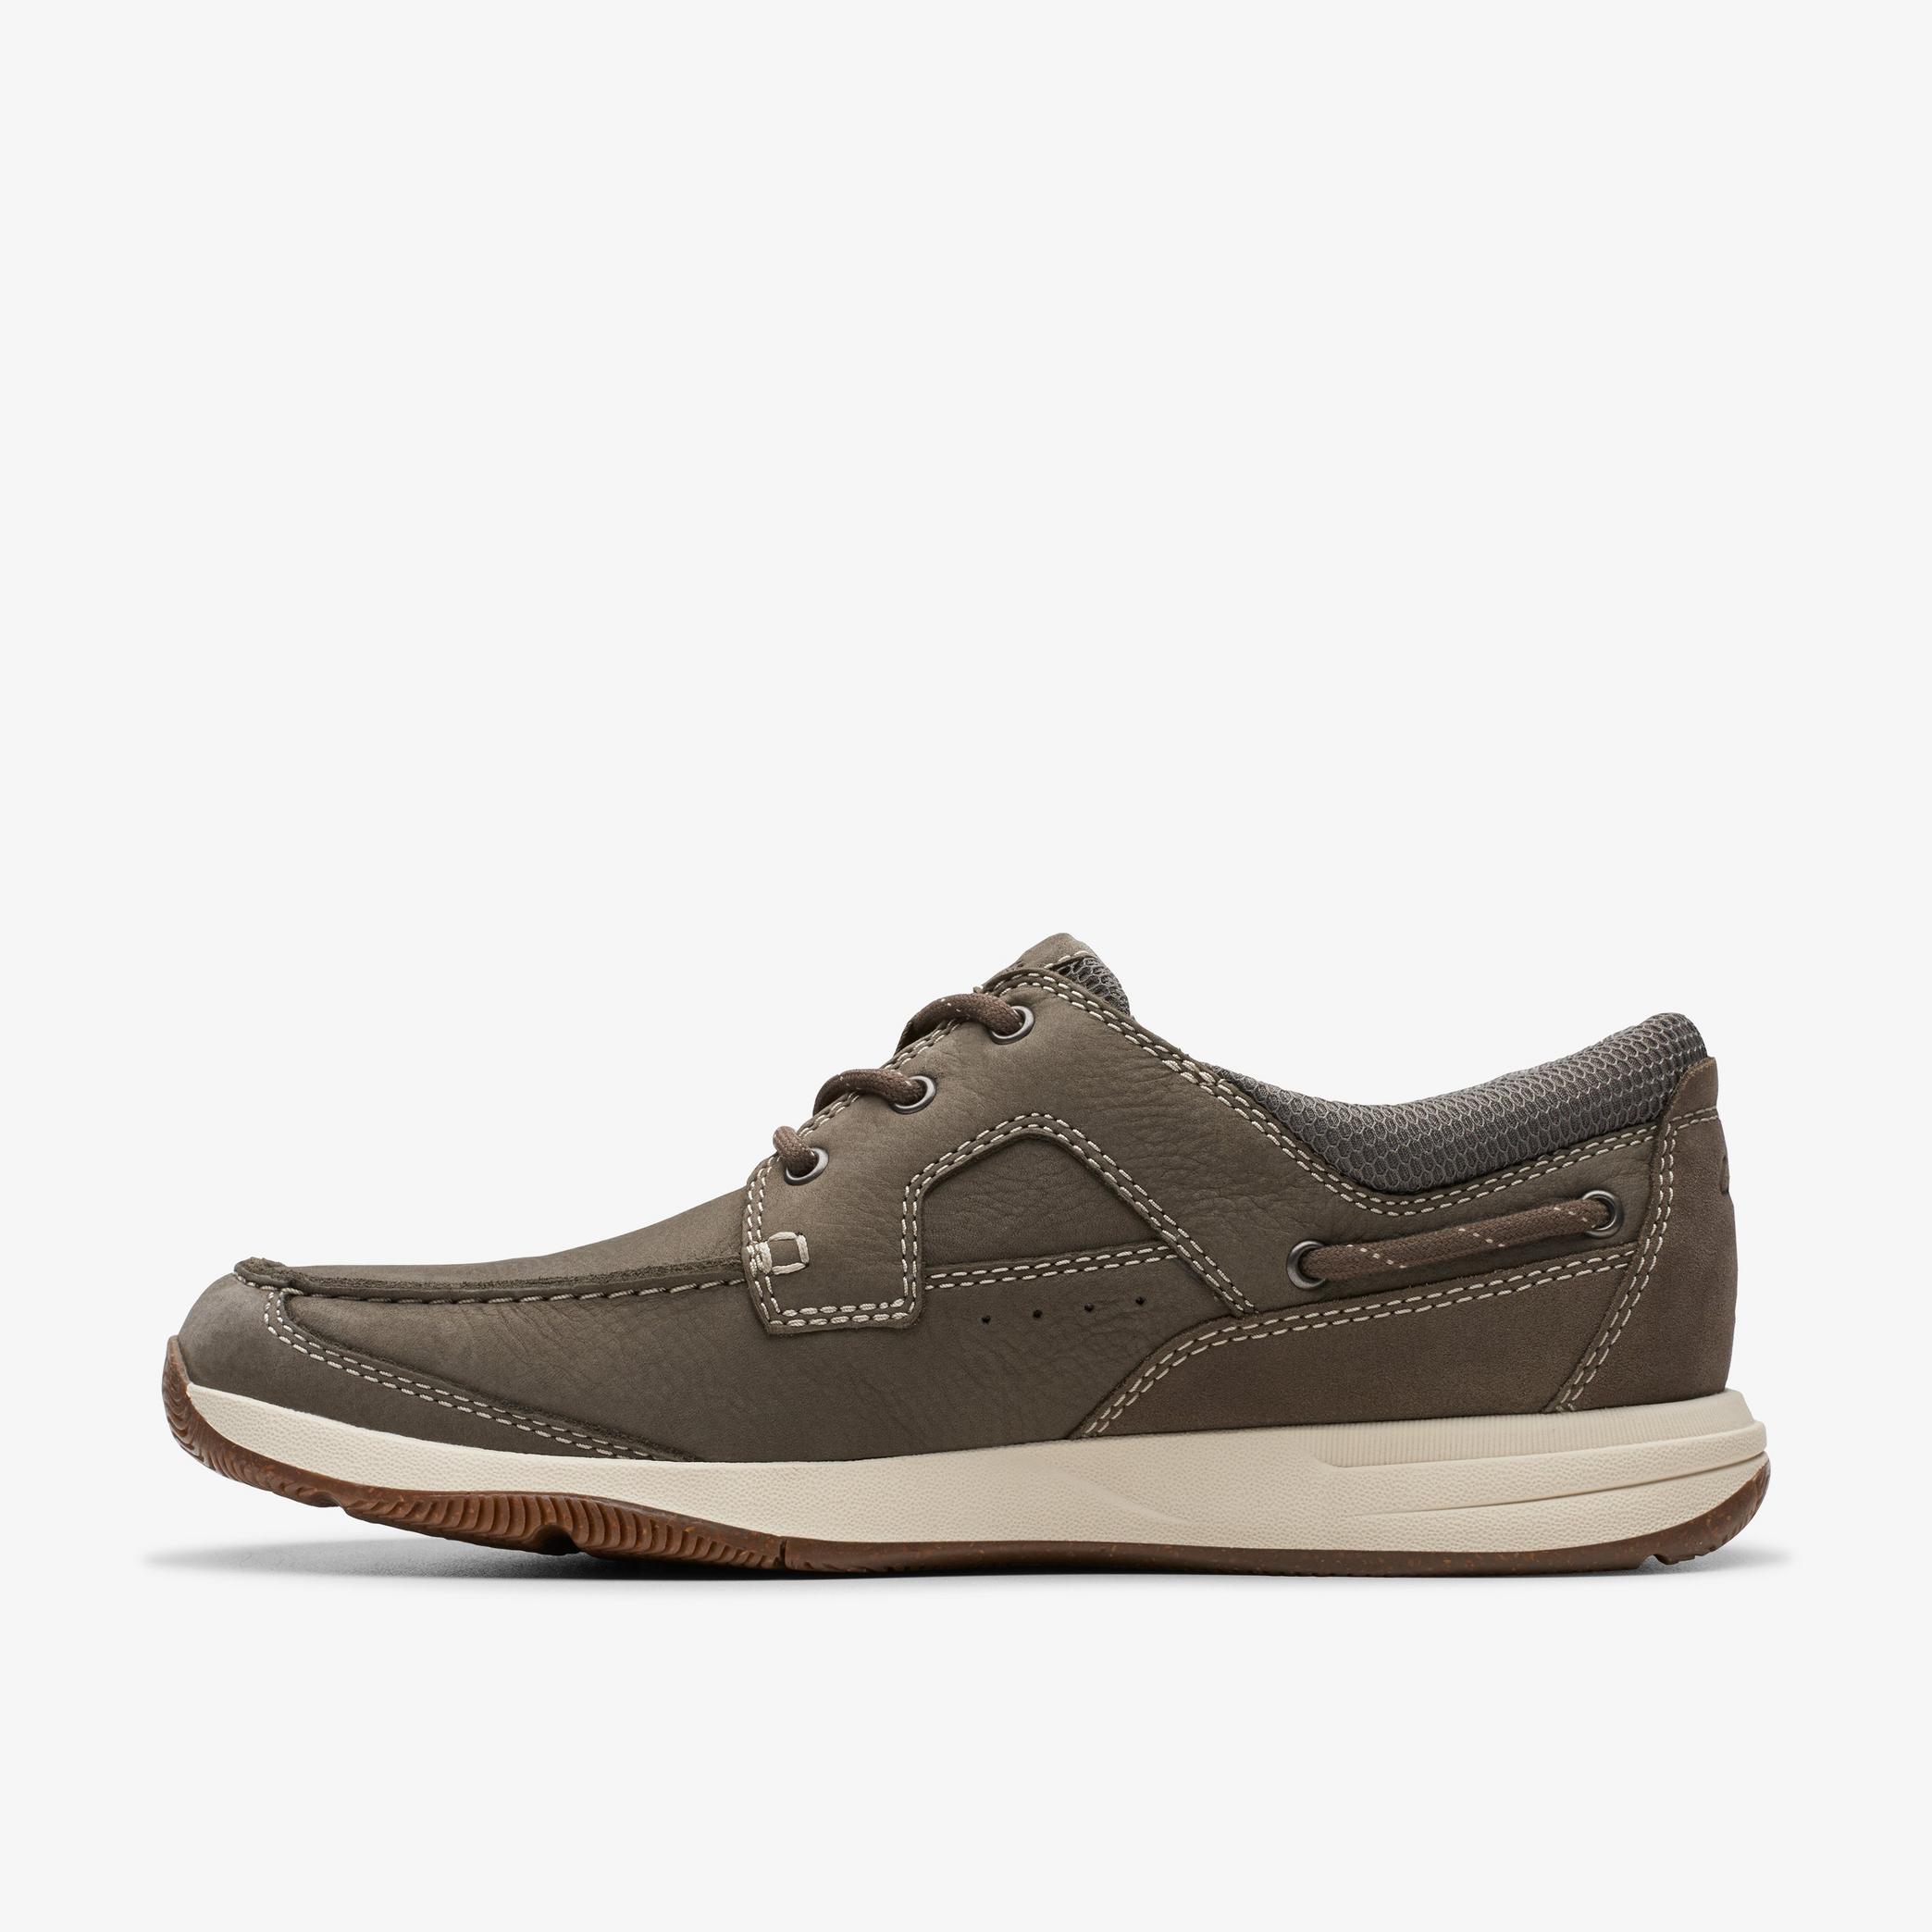 Sailview Lace Taupe Nubuck Boat Shoes, view 2 of 6